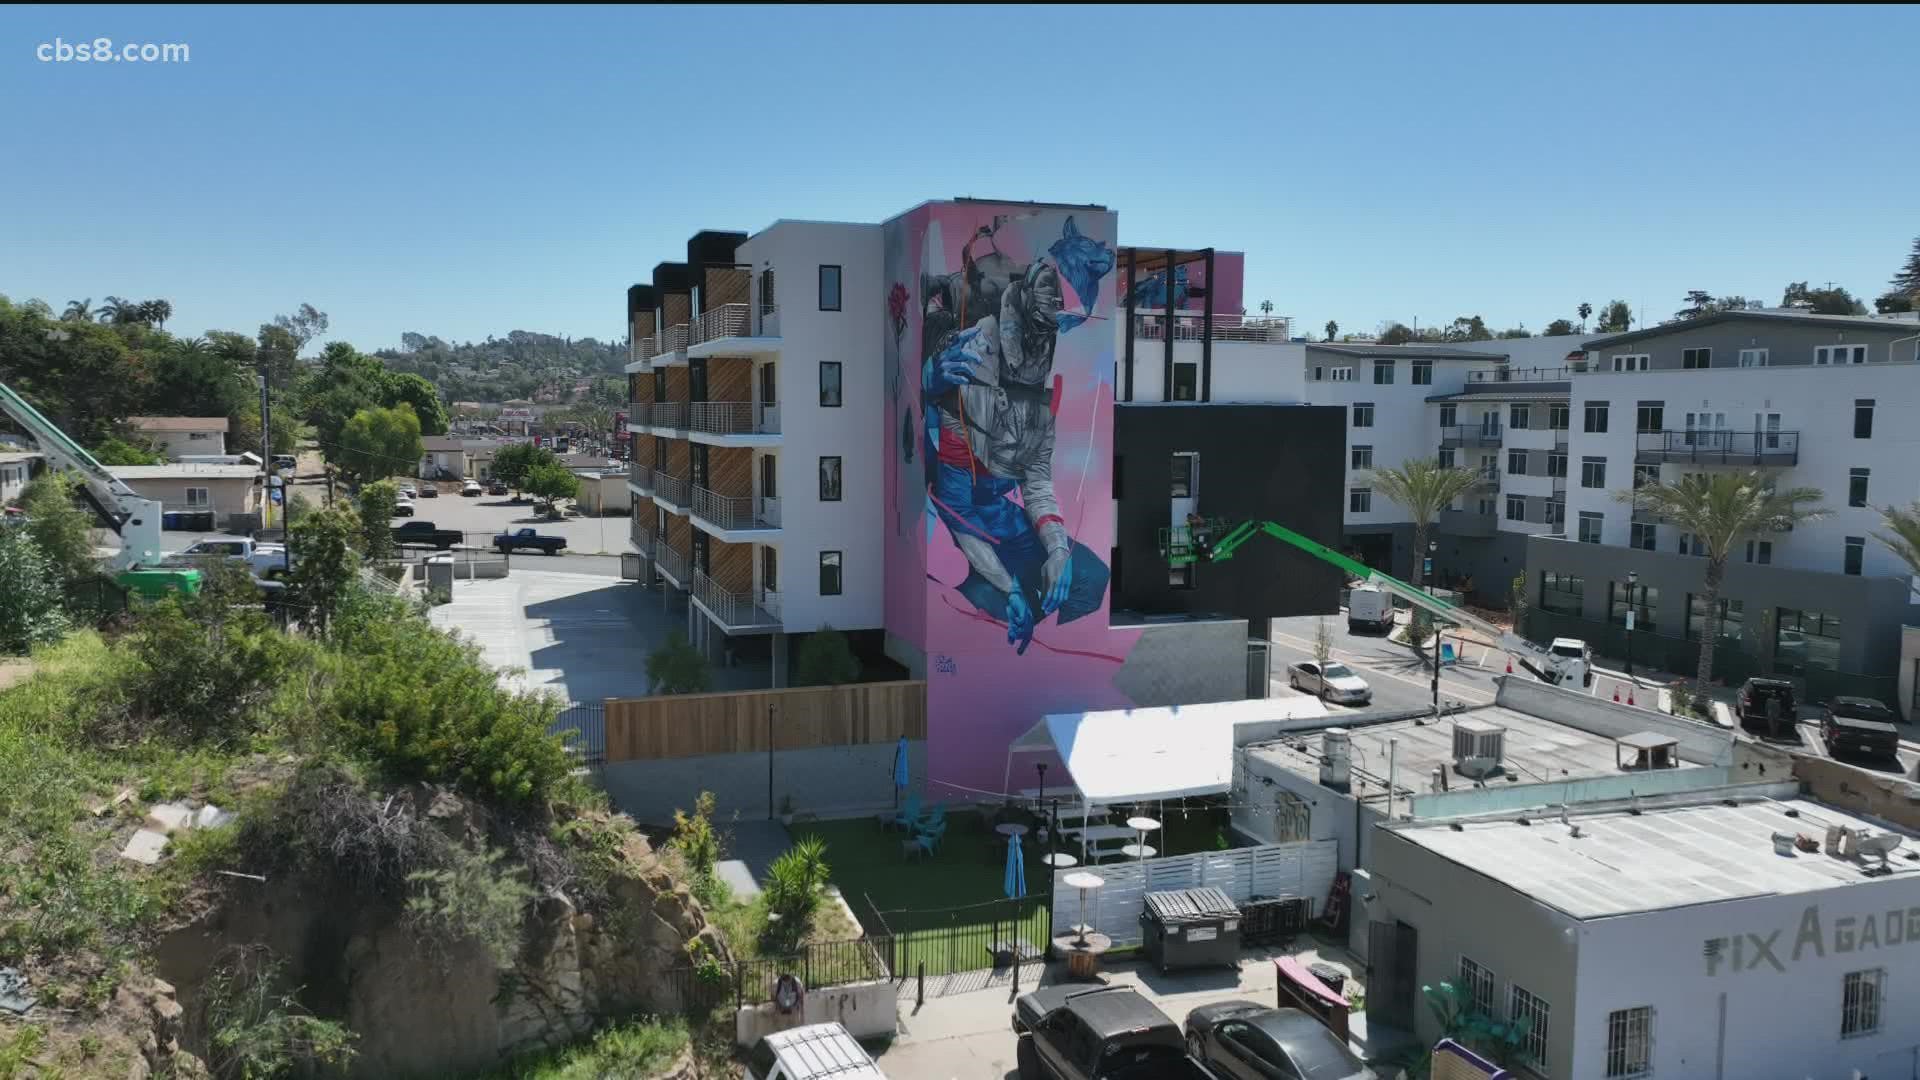 The 60 feet mural was debuted on Sunday and is painted on Found Lofts in Vista’s Arts and Culture District.